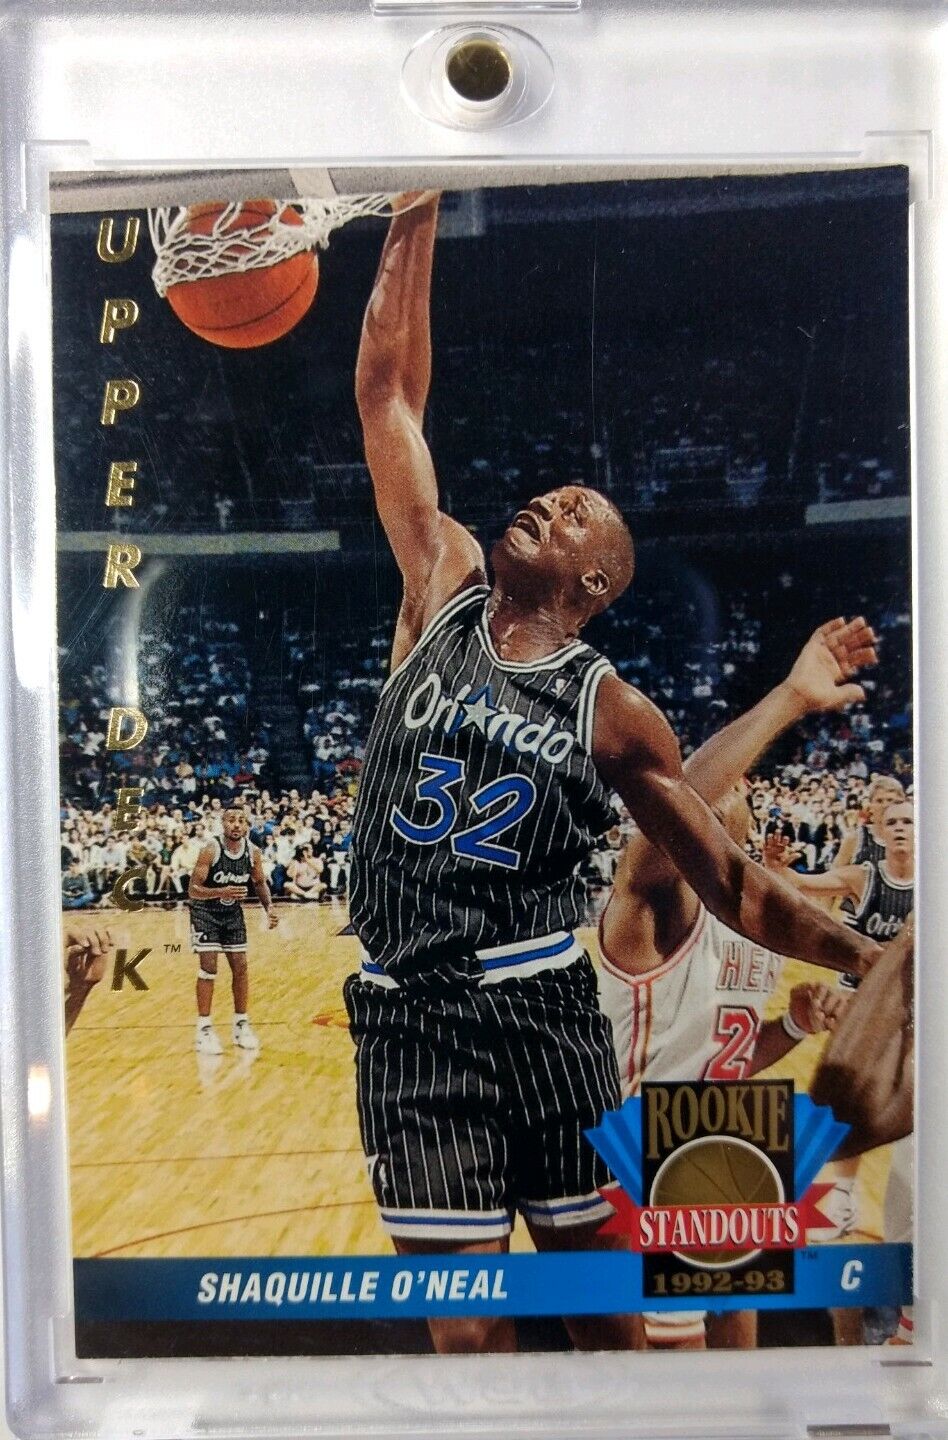 Rare Italian: 1992-93 Upper Deck Rookie Standouts Shaquille O\'neal RC #69